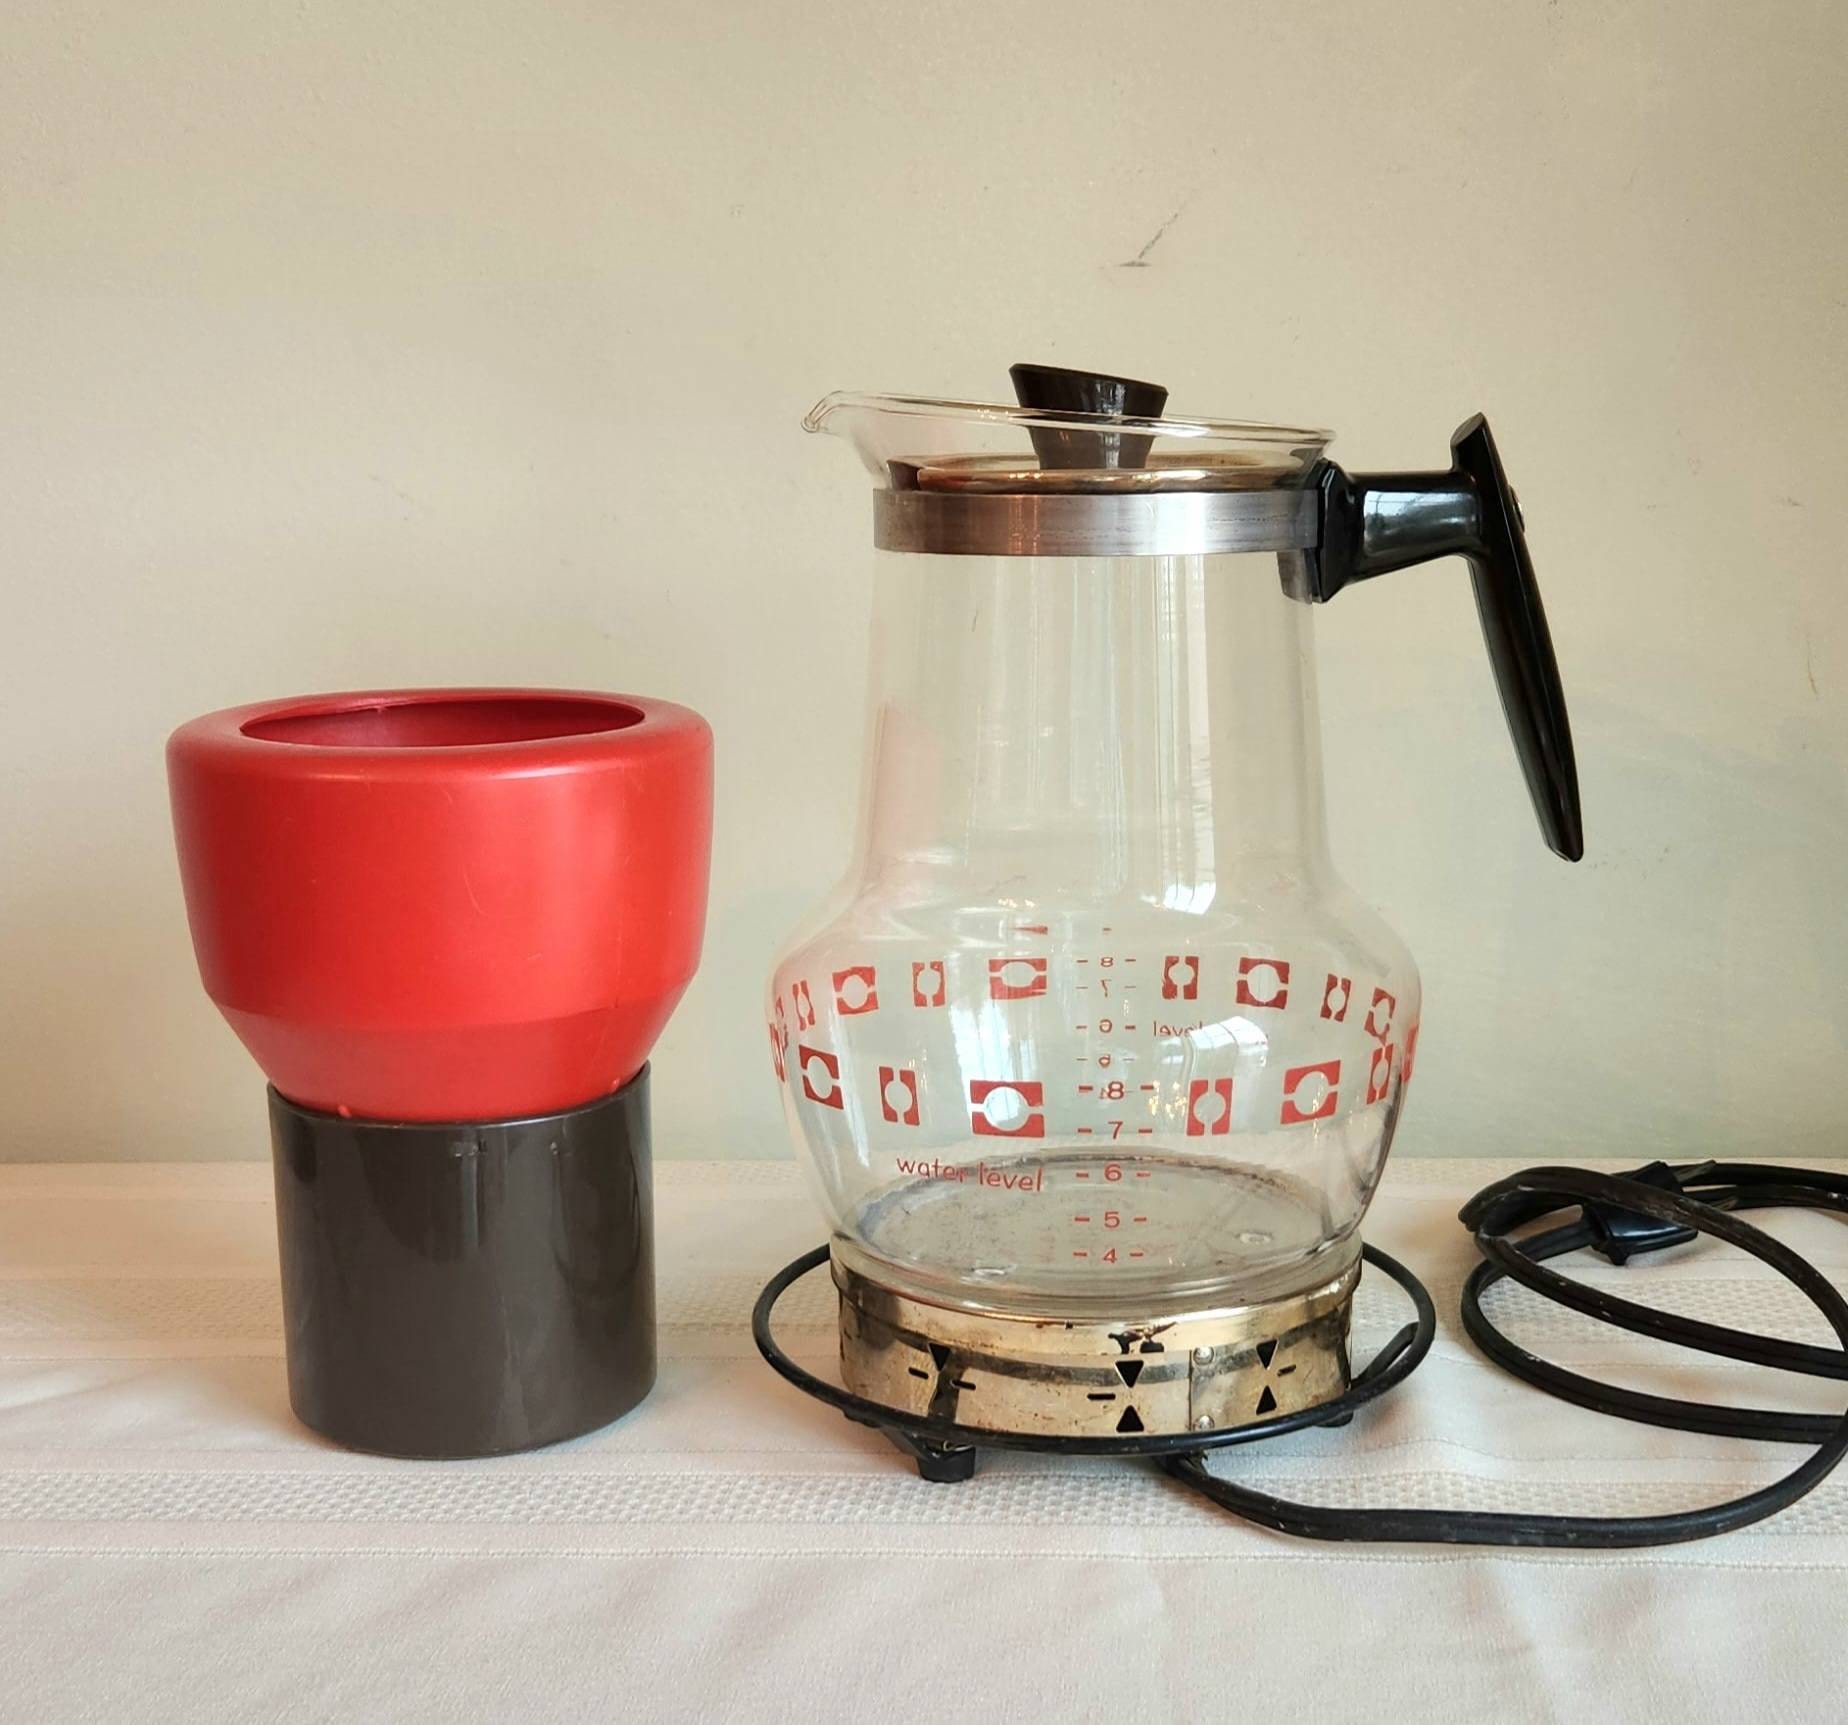 Vintage Coffee Carafe and Warmer, Pyrex, Silex, Includes the Candle Warmer  and Trivet, Mid Century, 1960s 